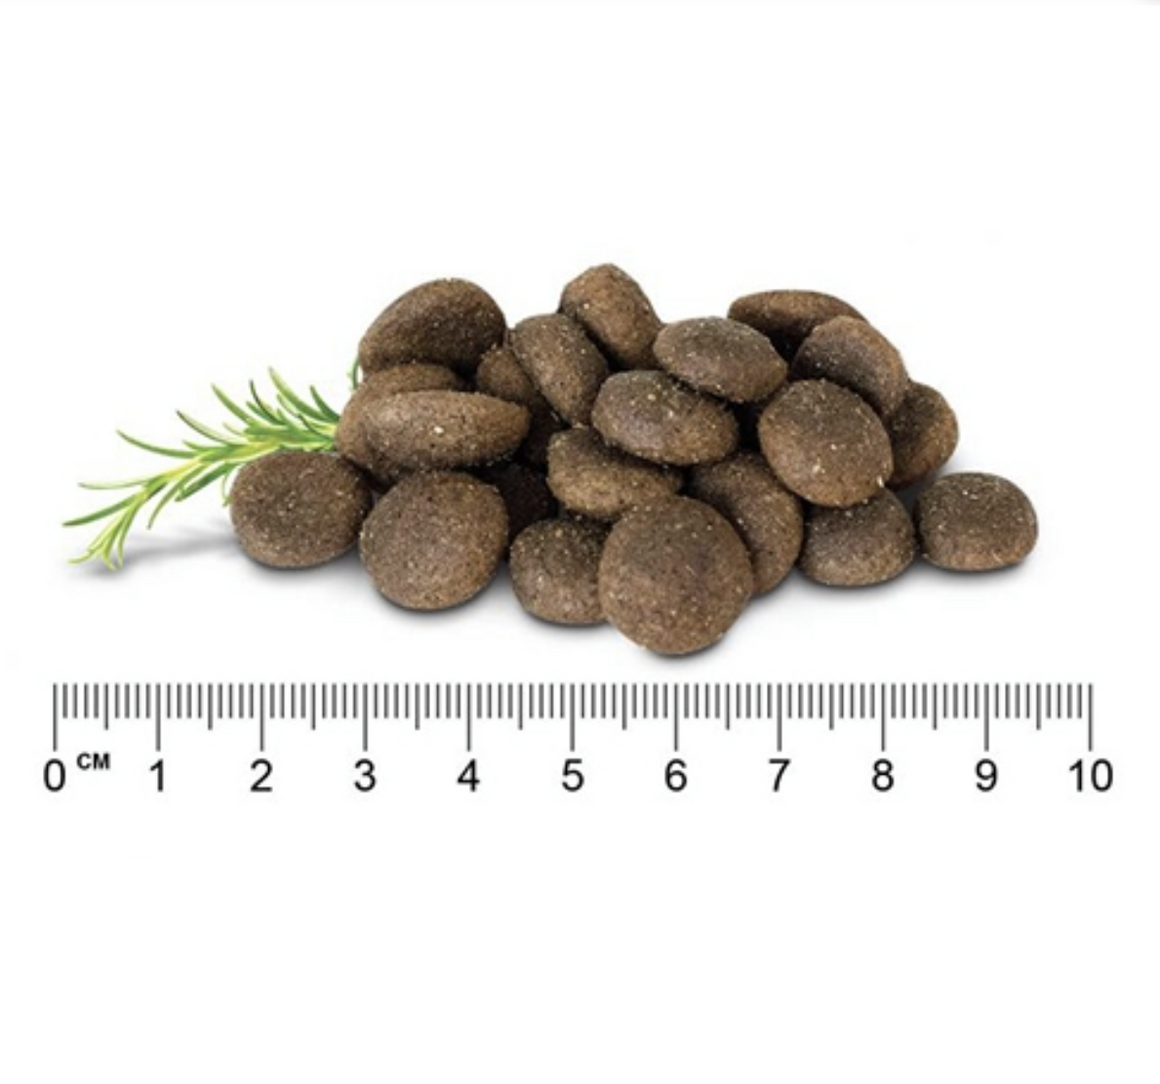 Stay Loyal Chicken, Lamb and Fish Grain Free size | Pet Food Leaders